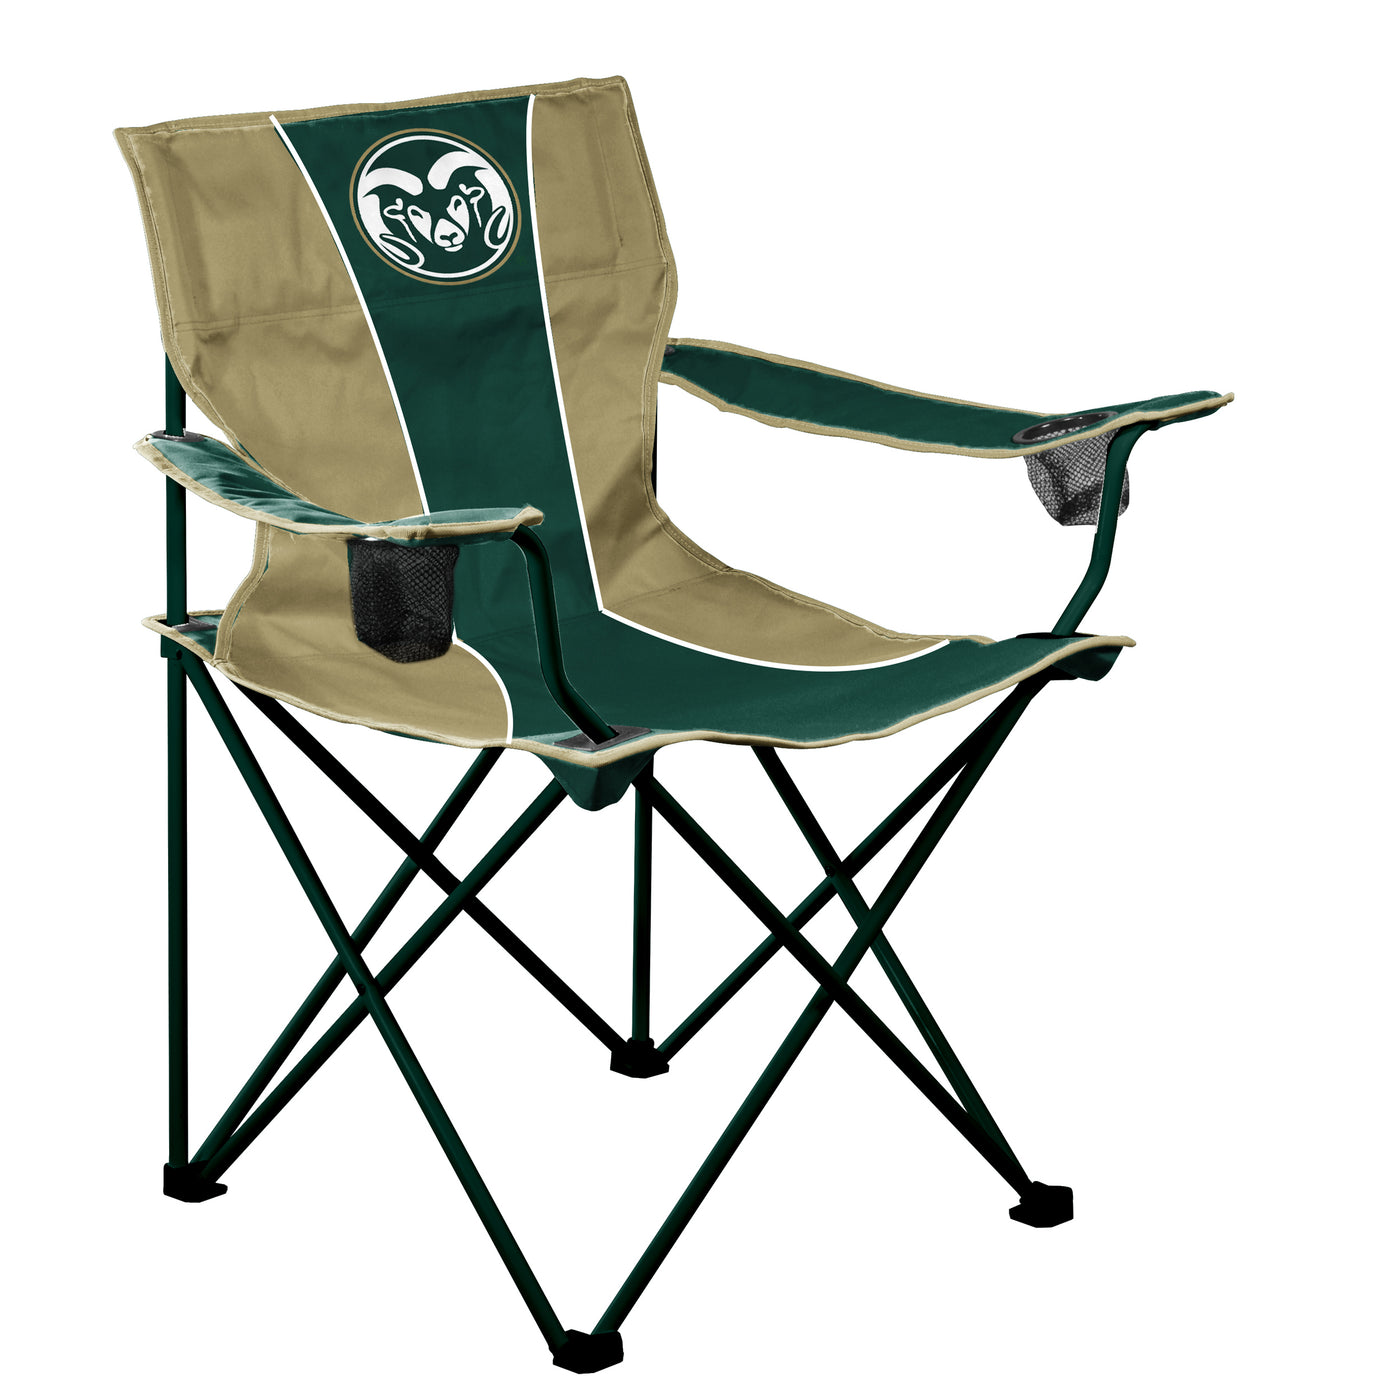 CO State Big Boy Chair Colored Frame